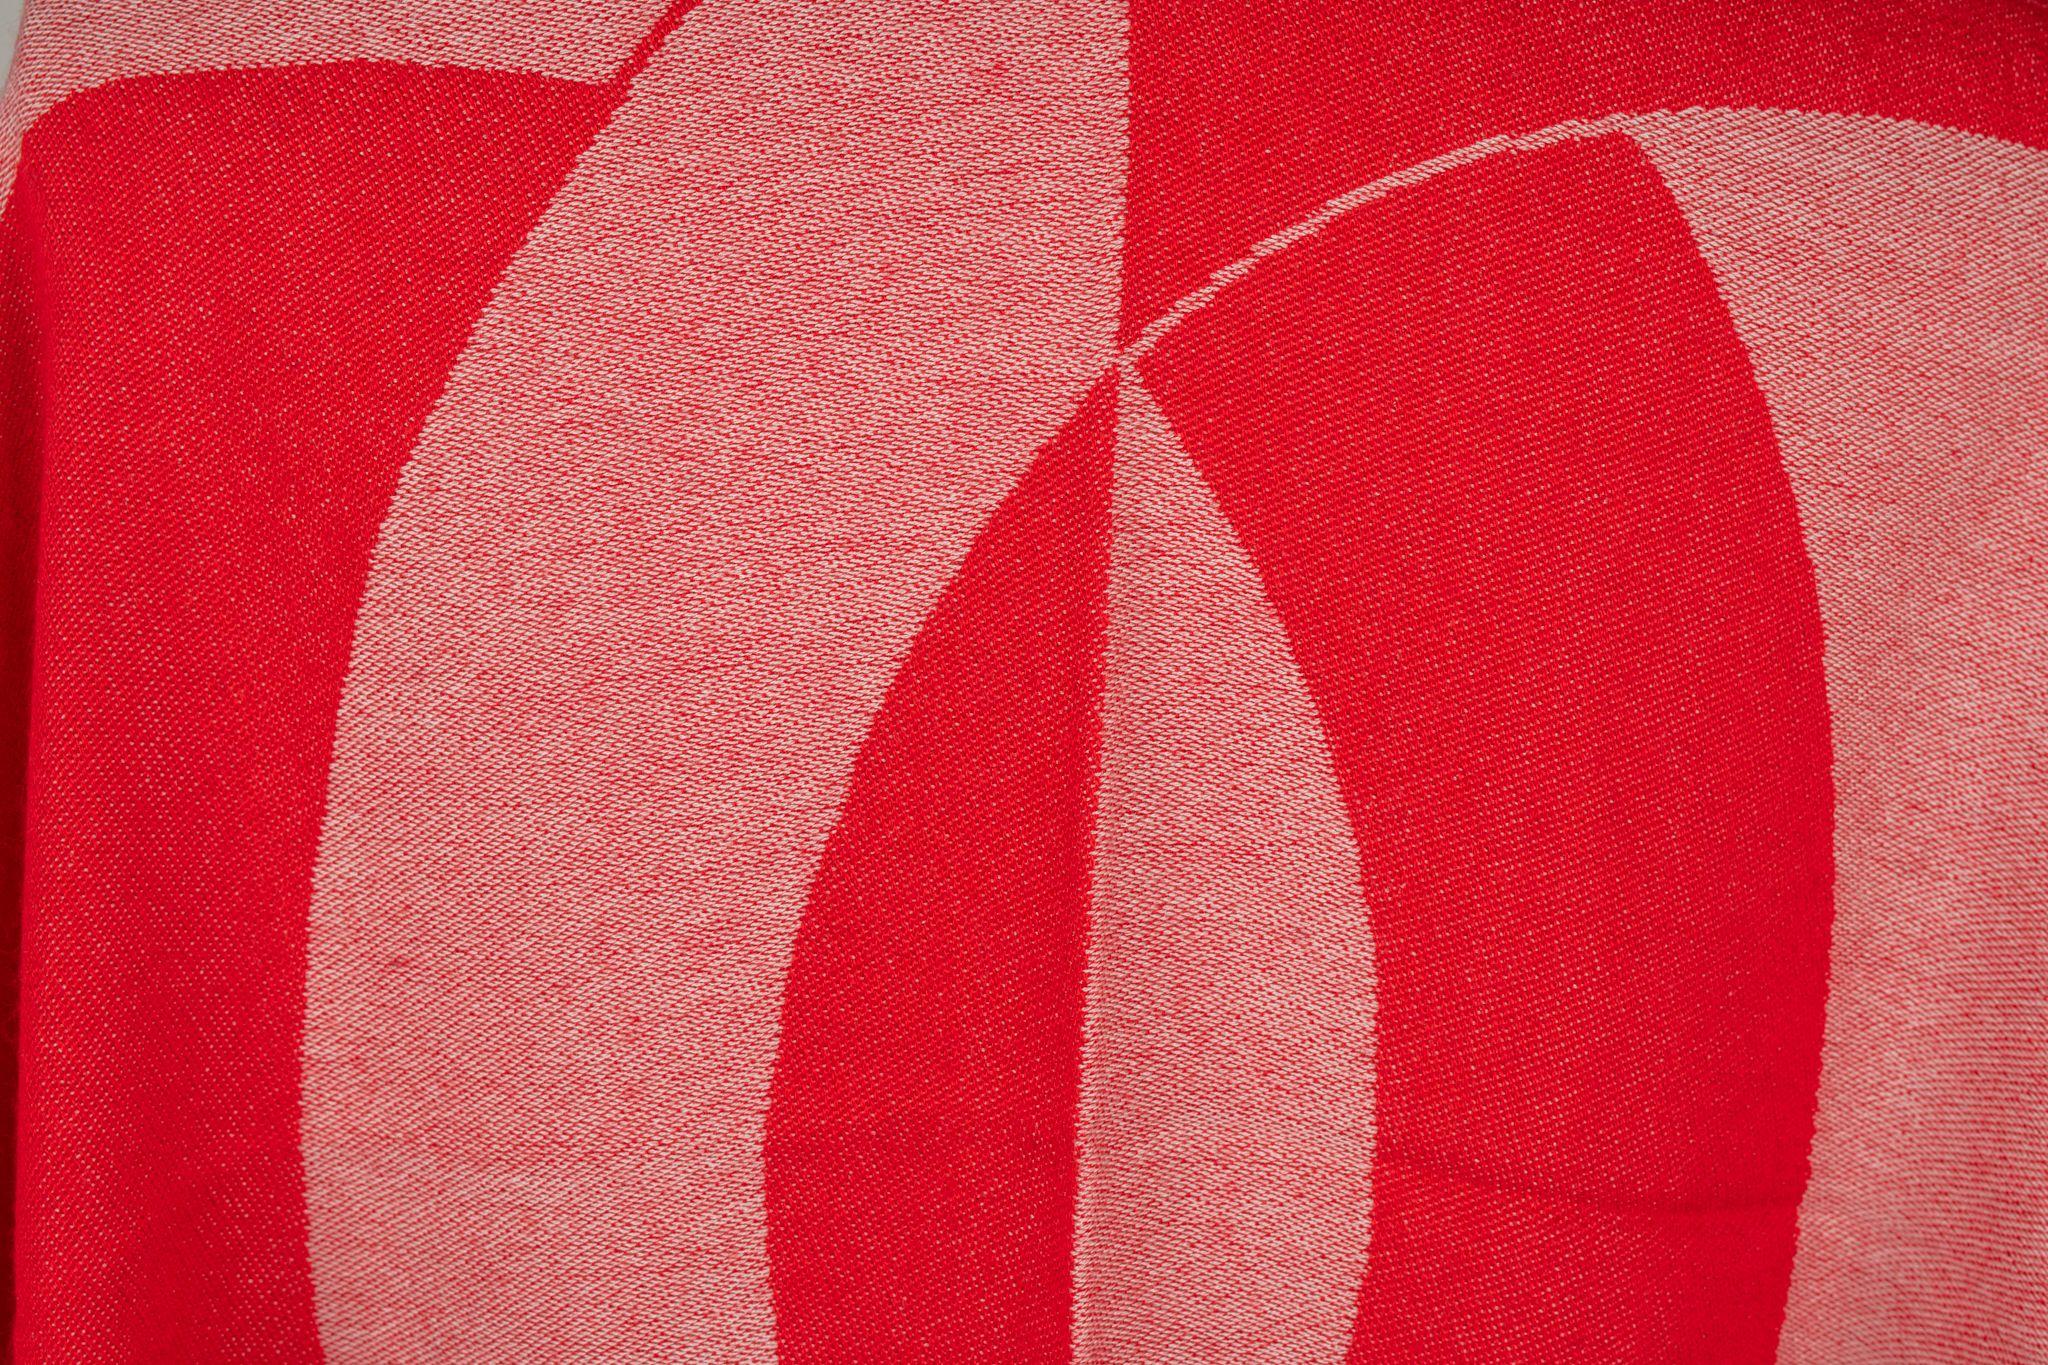 Chanel Cashmere Shawl in red. The pattern features one big CC logo as the center piece. Also Chanel is written on the shawl. The item is in new condition.